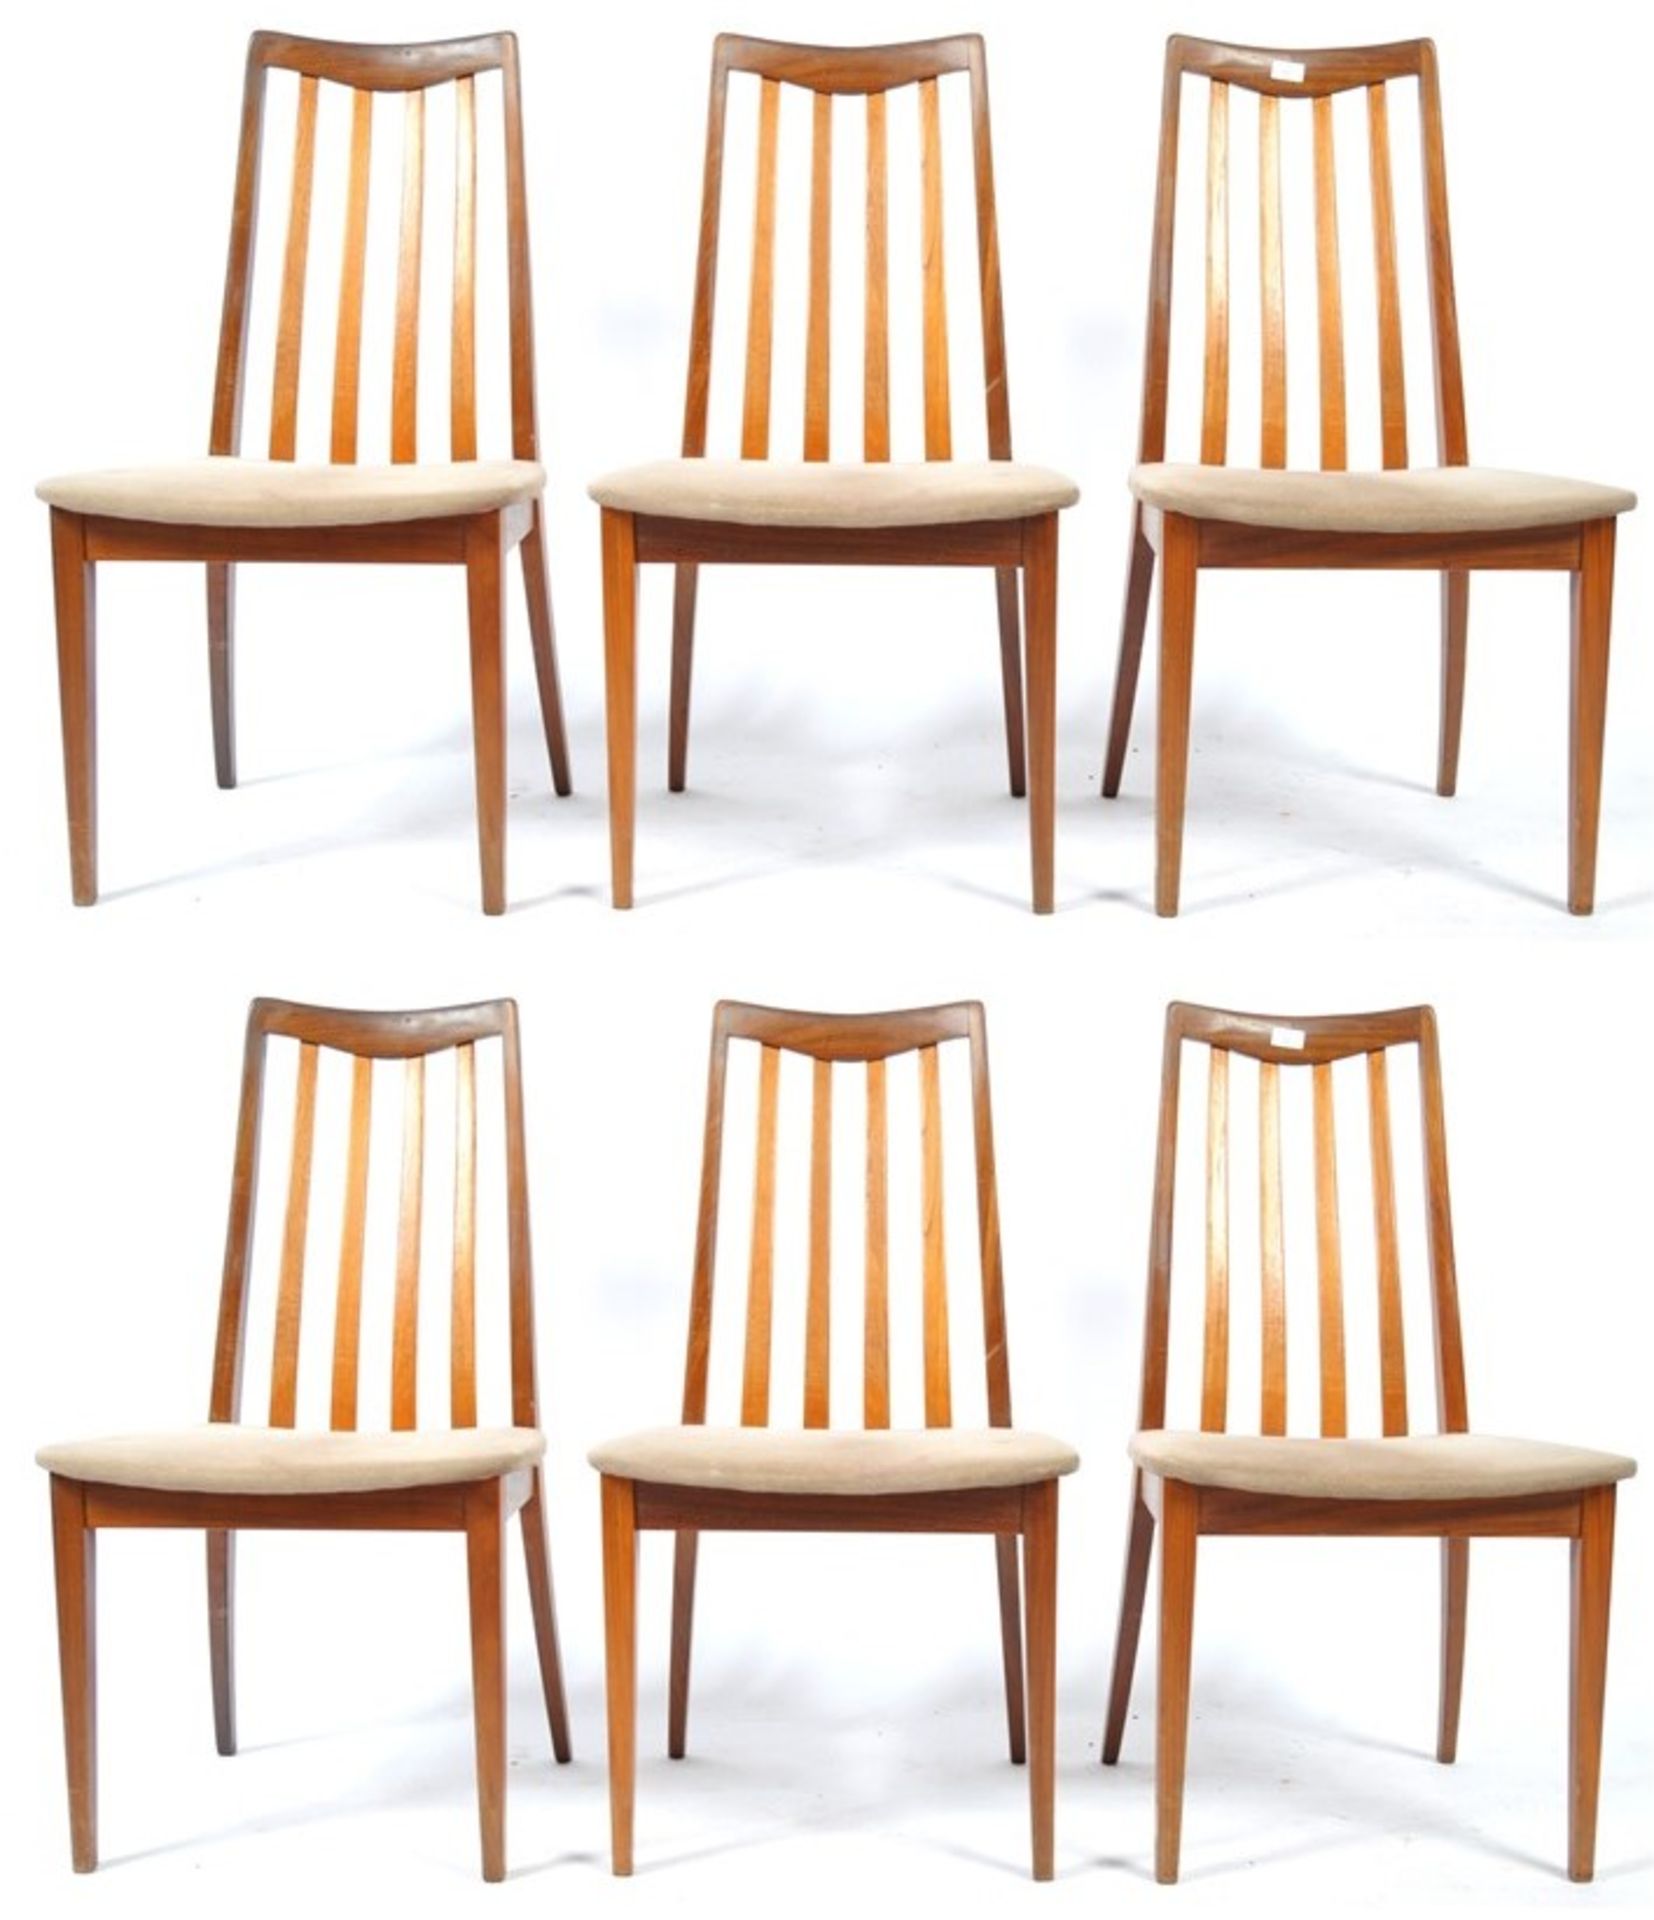 LESLIE DANDY FOR G-PLAN SET OF 6 TEAK WOOD DINING CHAIRS